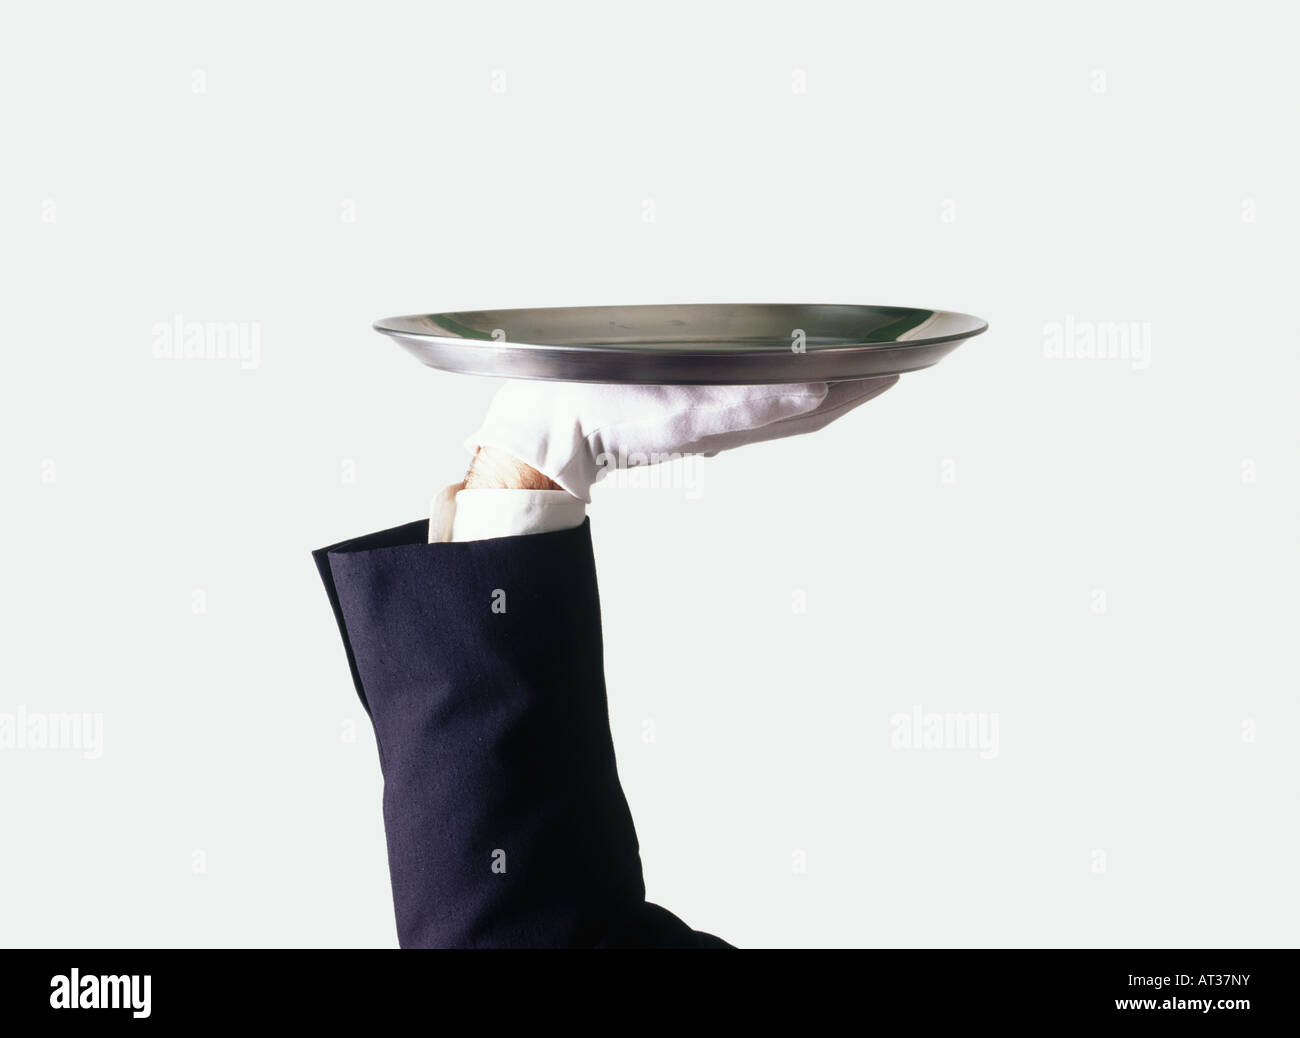 A waiter holding a silver tray Stock Photo